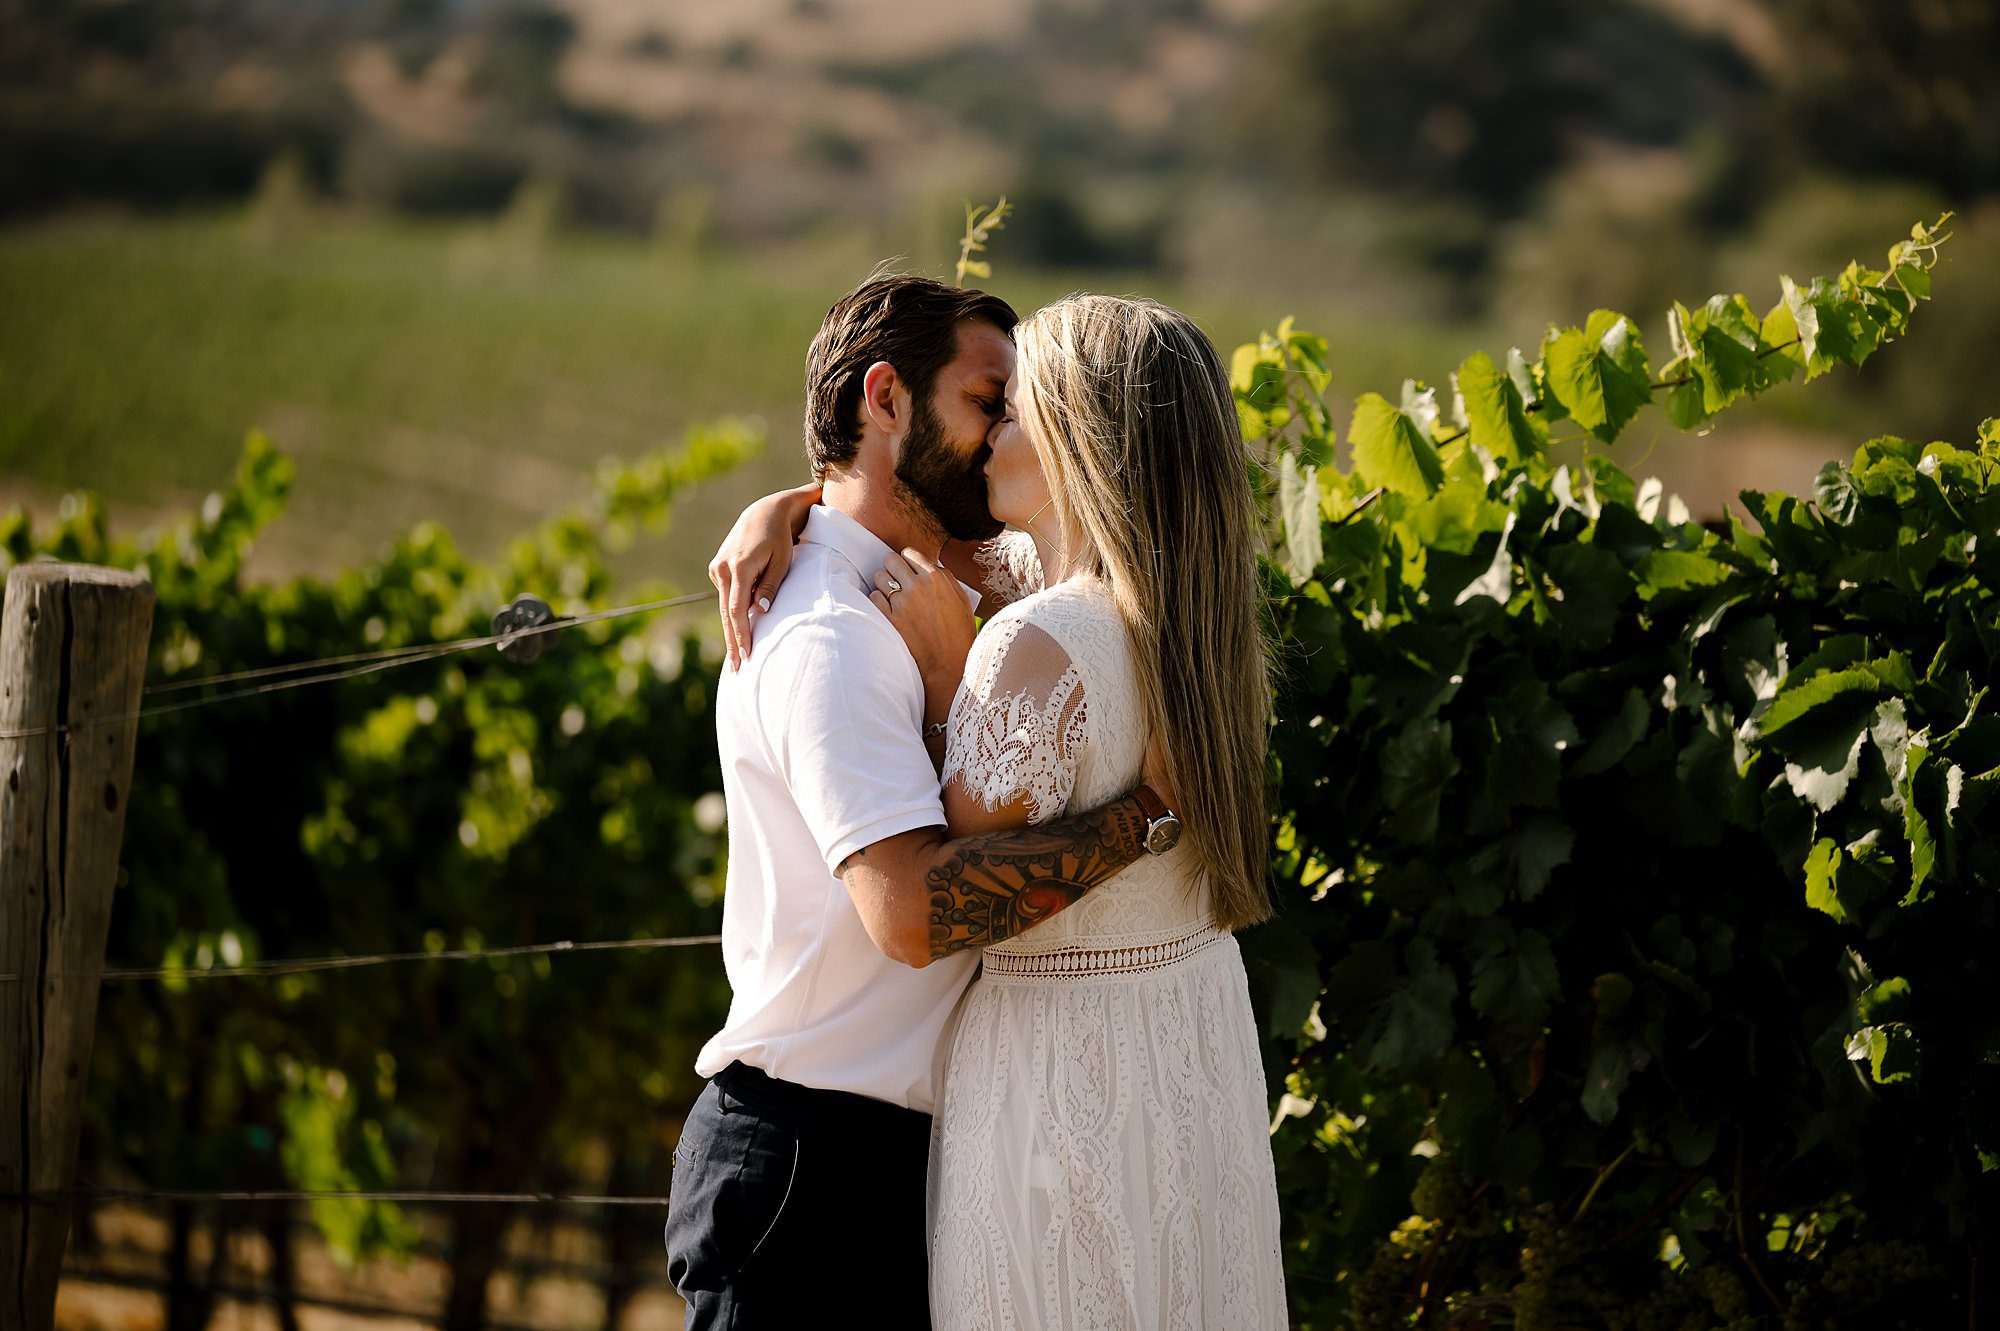 Cameron and Melissa kiss in the vineyard after Melissa accepts his proposal at Domaine Carneros in Napa.